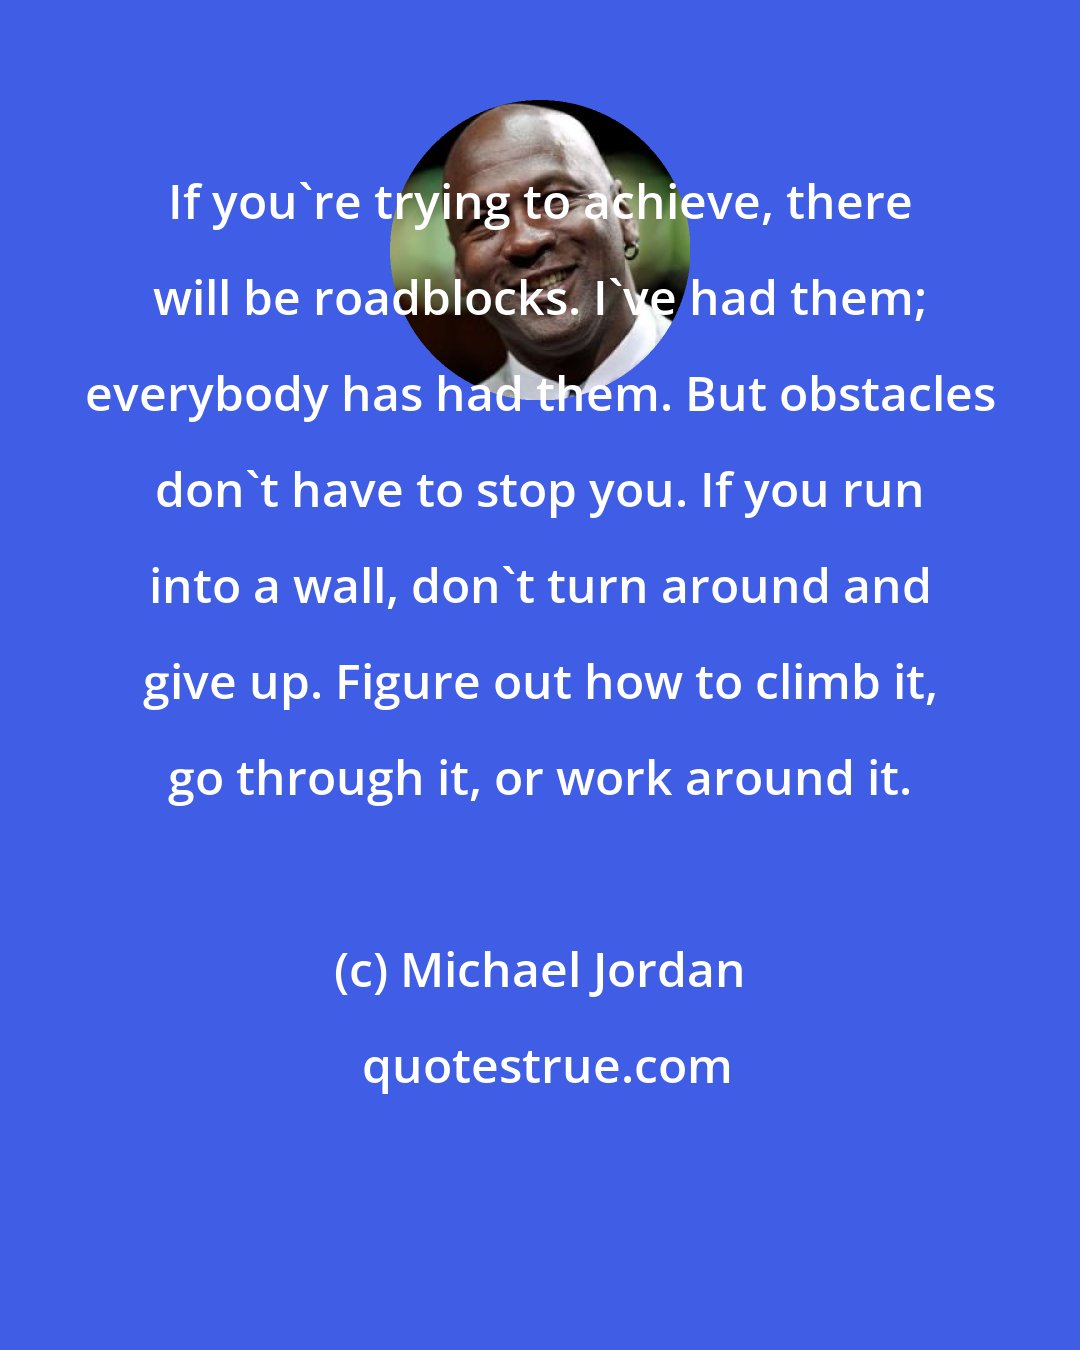 Michael Jordan: If you're trying to achieve, there will be roadblocks. I've had them; everybody has had them. But obstacles don't have to stop you. If you run into a wall, don't turn around and give up. Figure out how to climb it, go through it, or work around it.